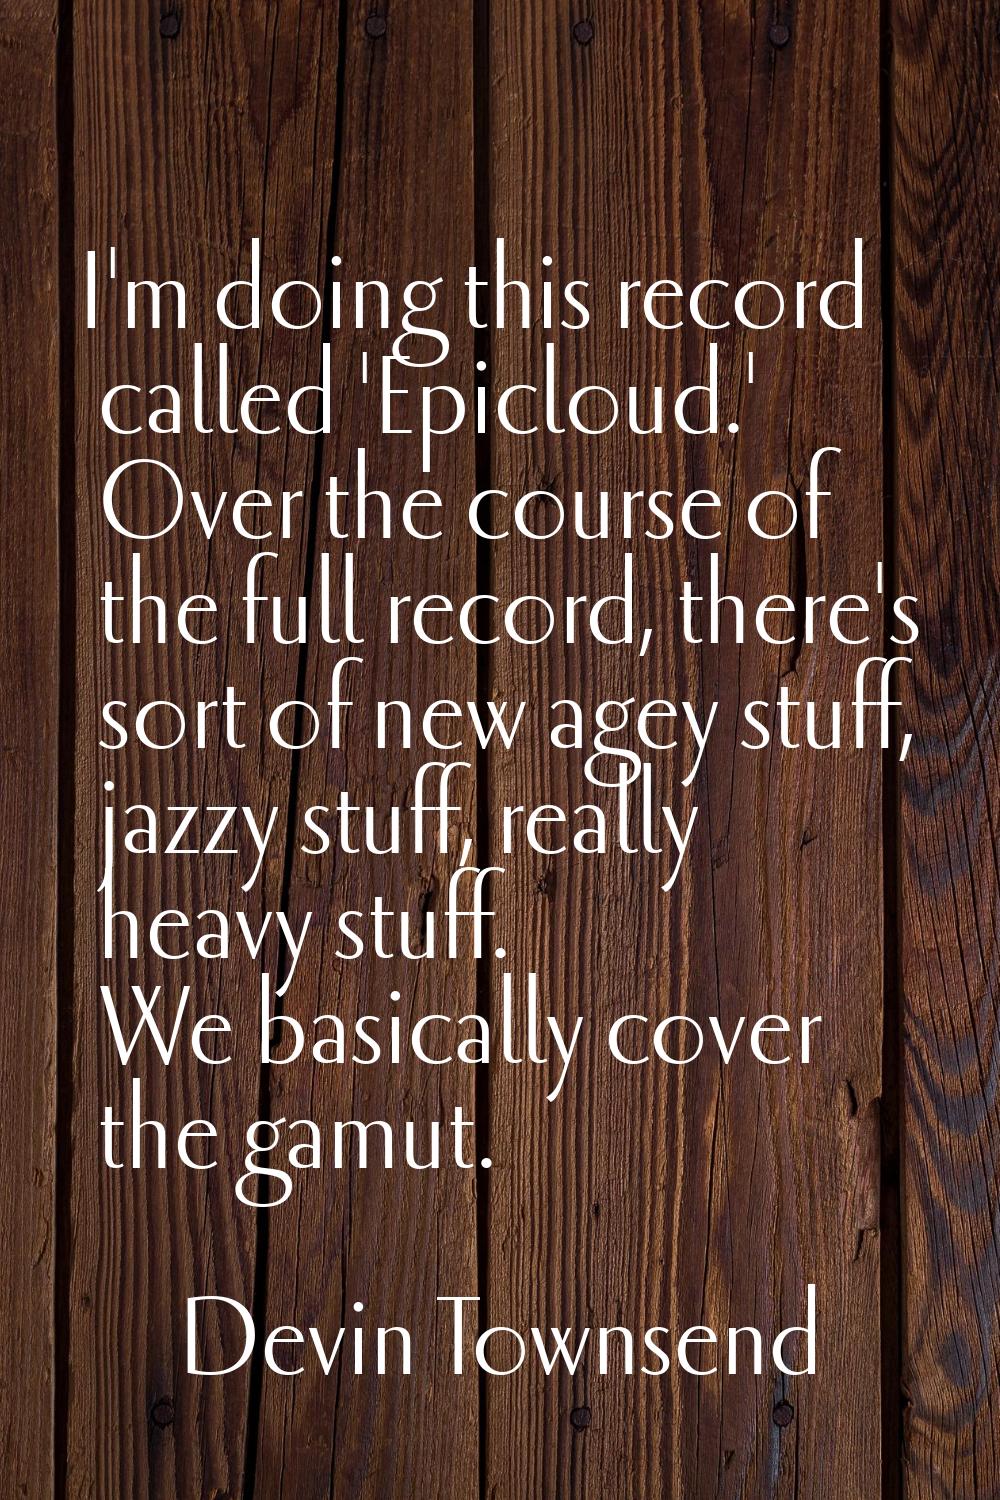 I'm doing this record called 'Epicloud.' Over the course of the full record, there's sort of new ag